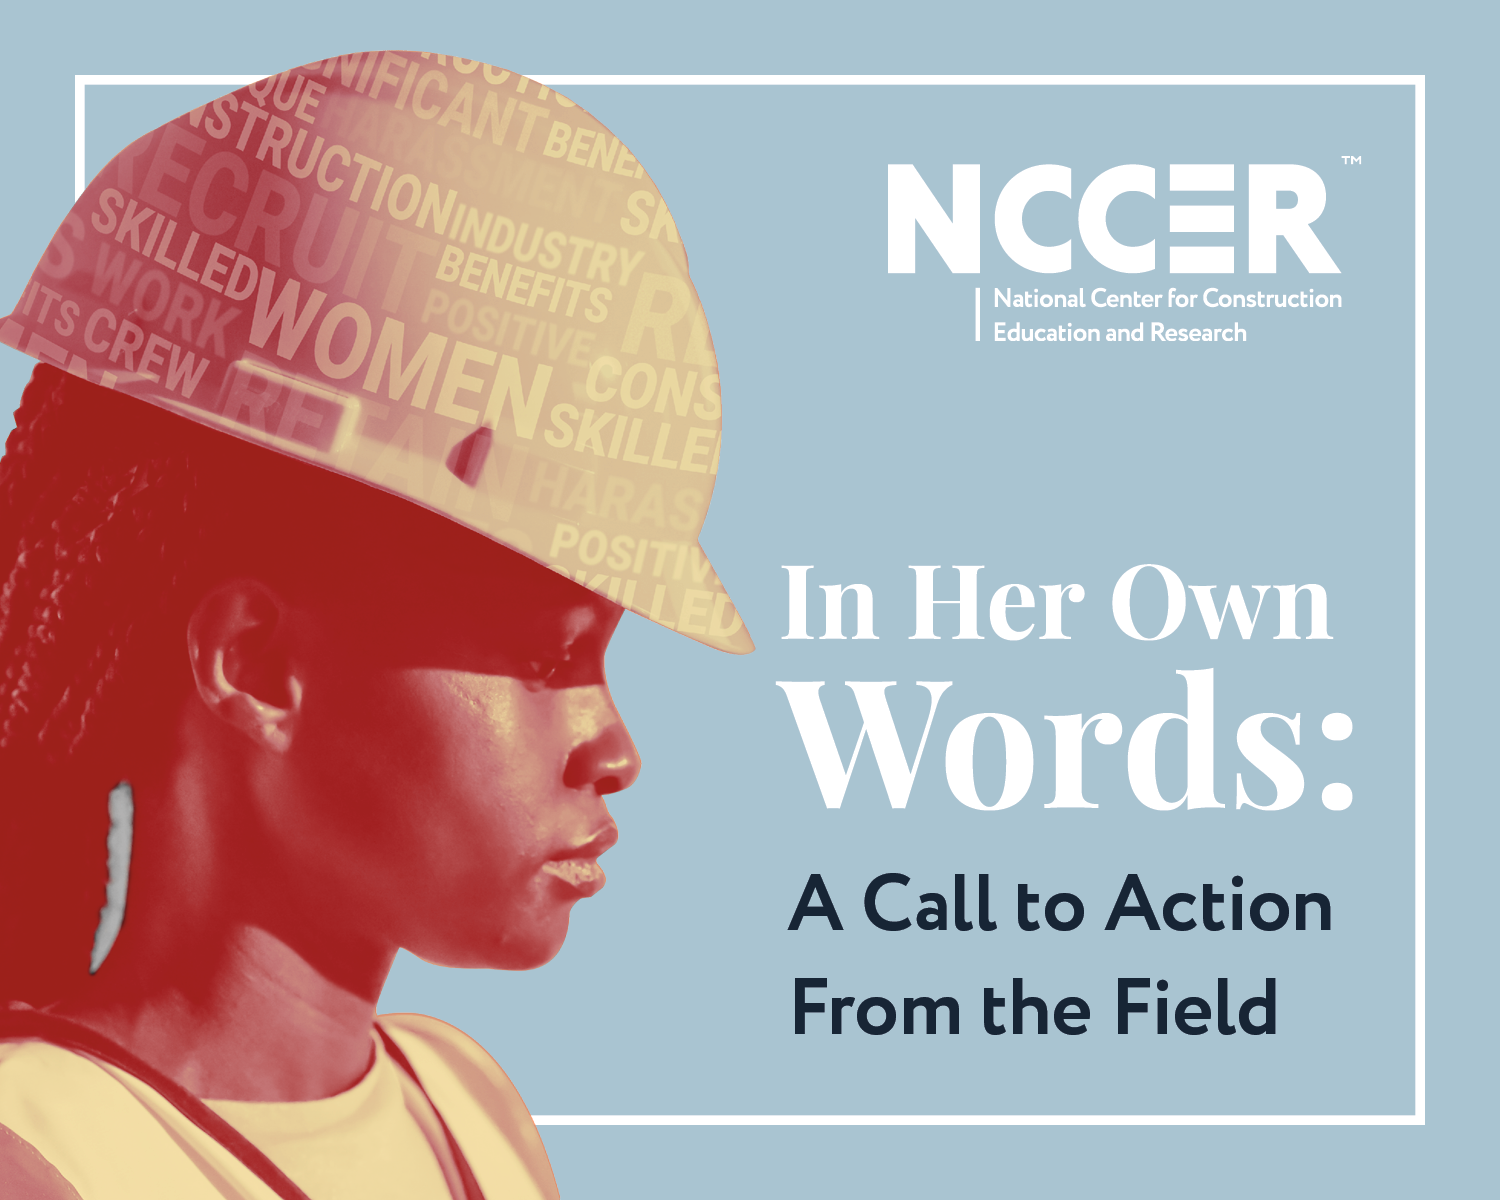 In Her Own Words: A Call to Action From the Field